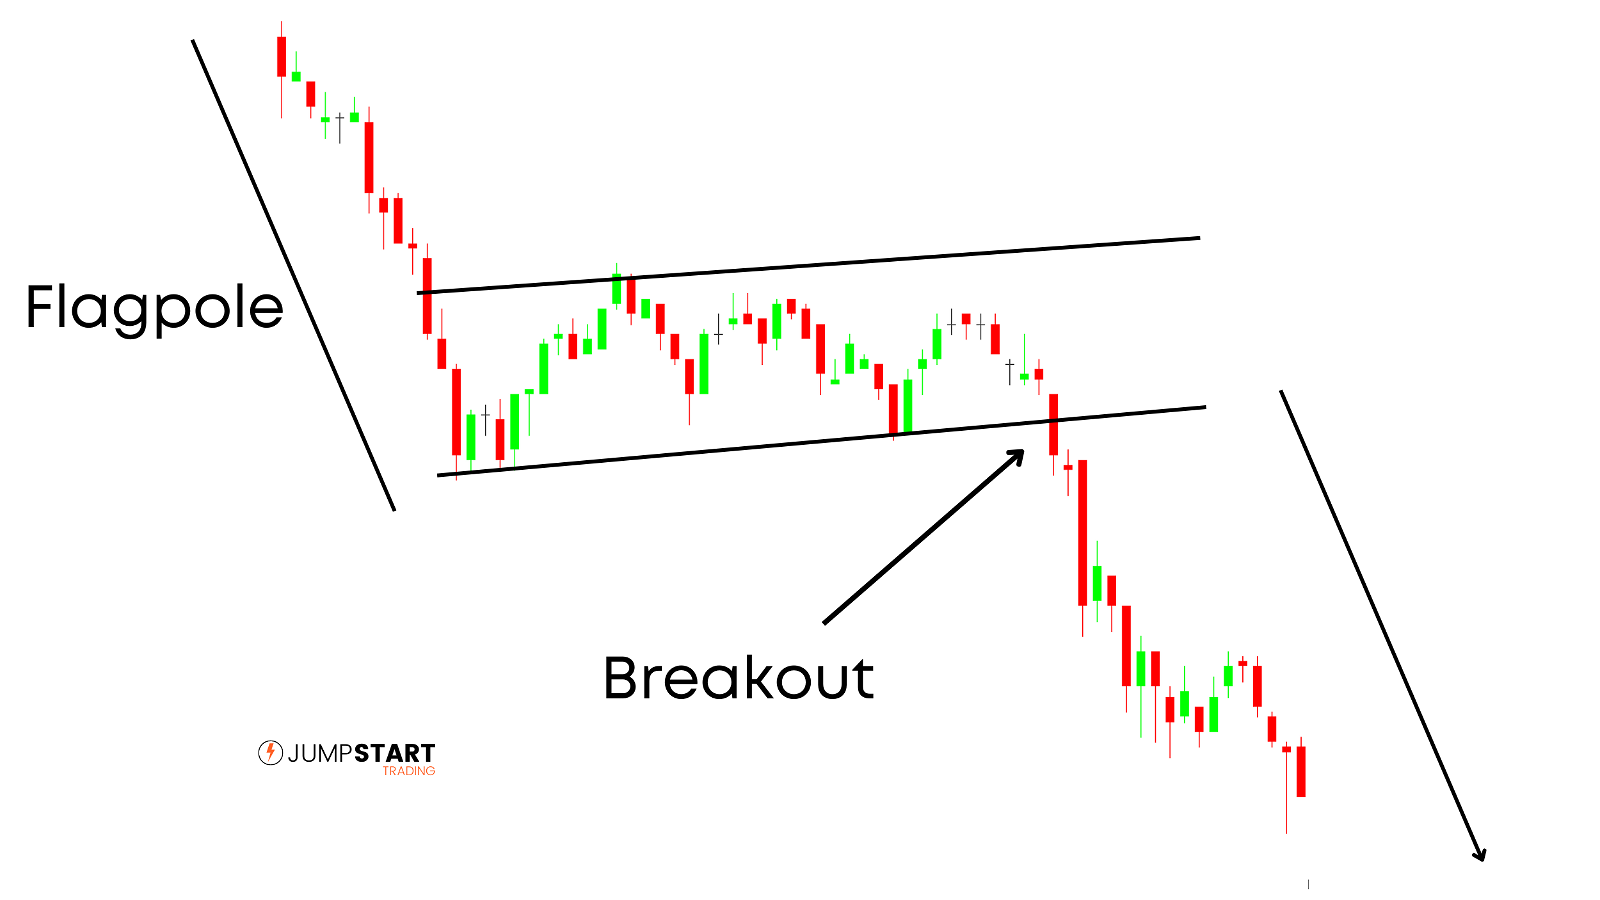 Price consolidating in a downtrend forming a bearish flag pattern